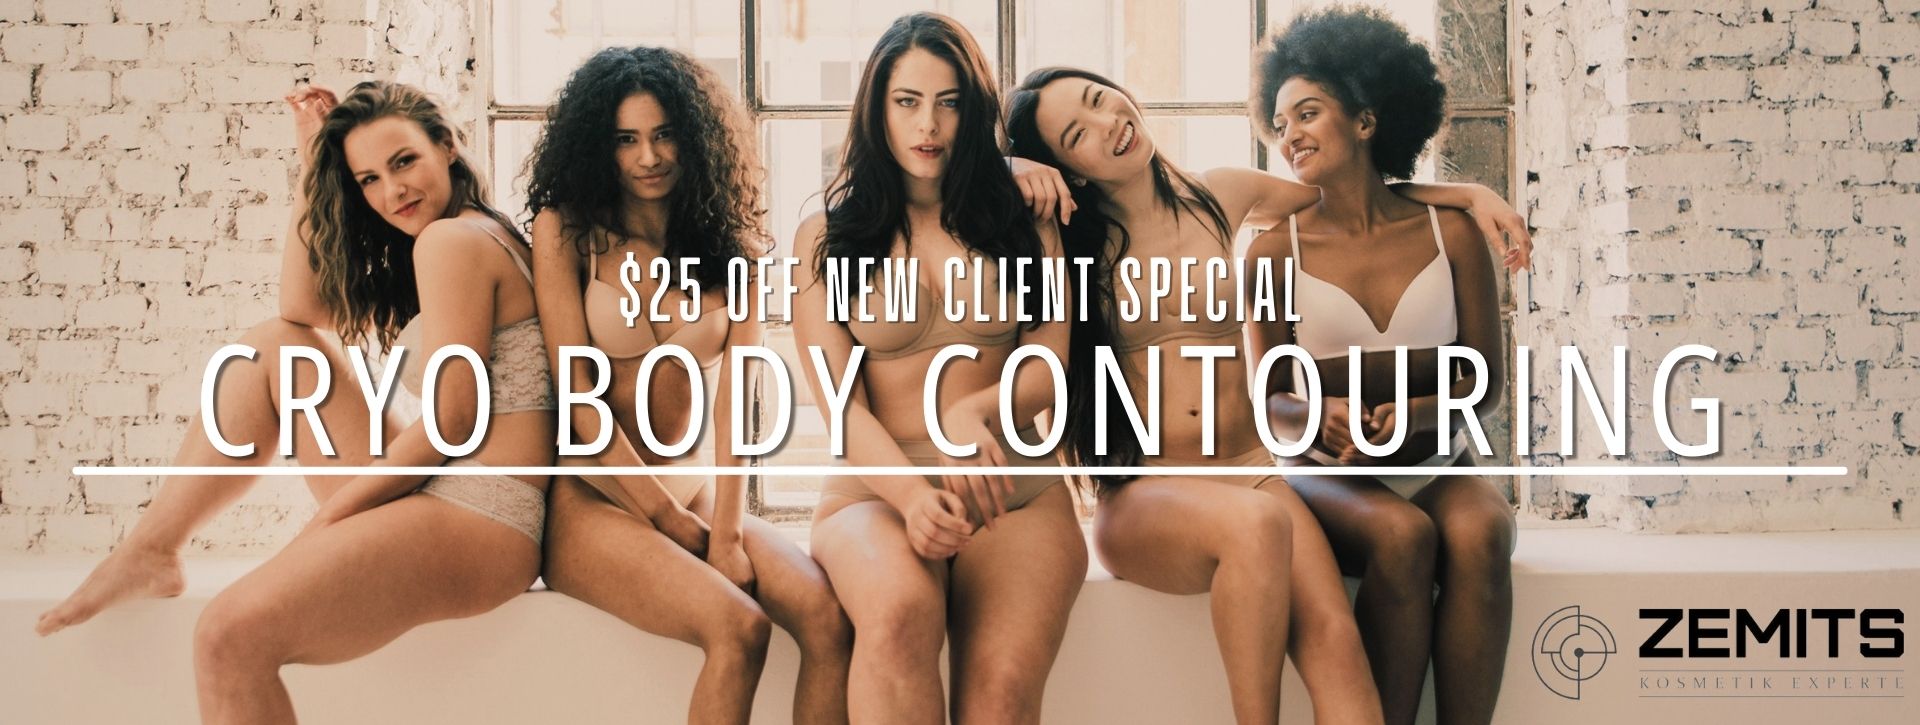 a group of ladies sitting and showing their bodies and skin promoting 25% off new client special cryo body contouring